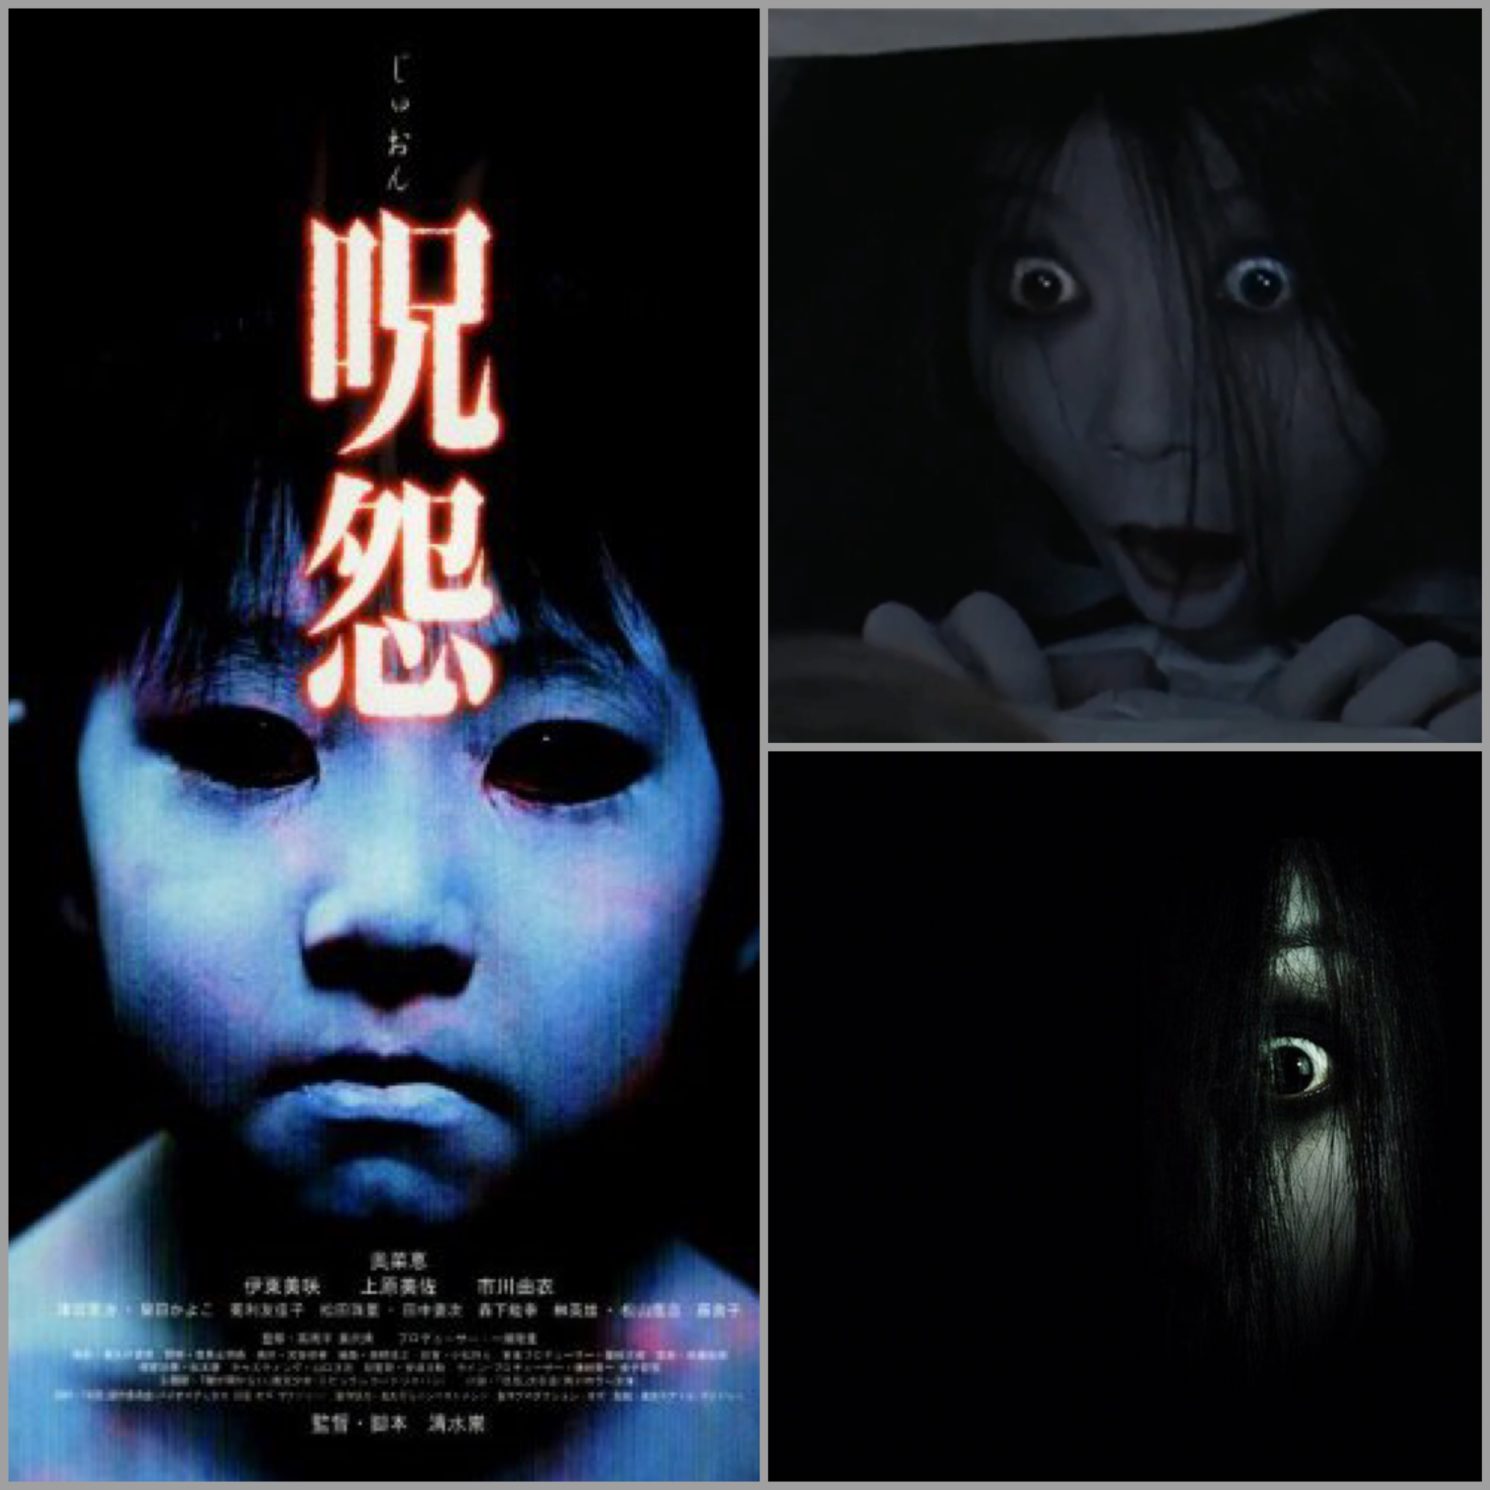 Insta Thoughts: Cinema – The Grudge (Ju-On)